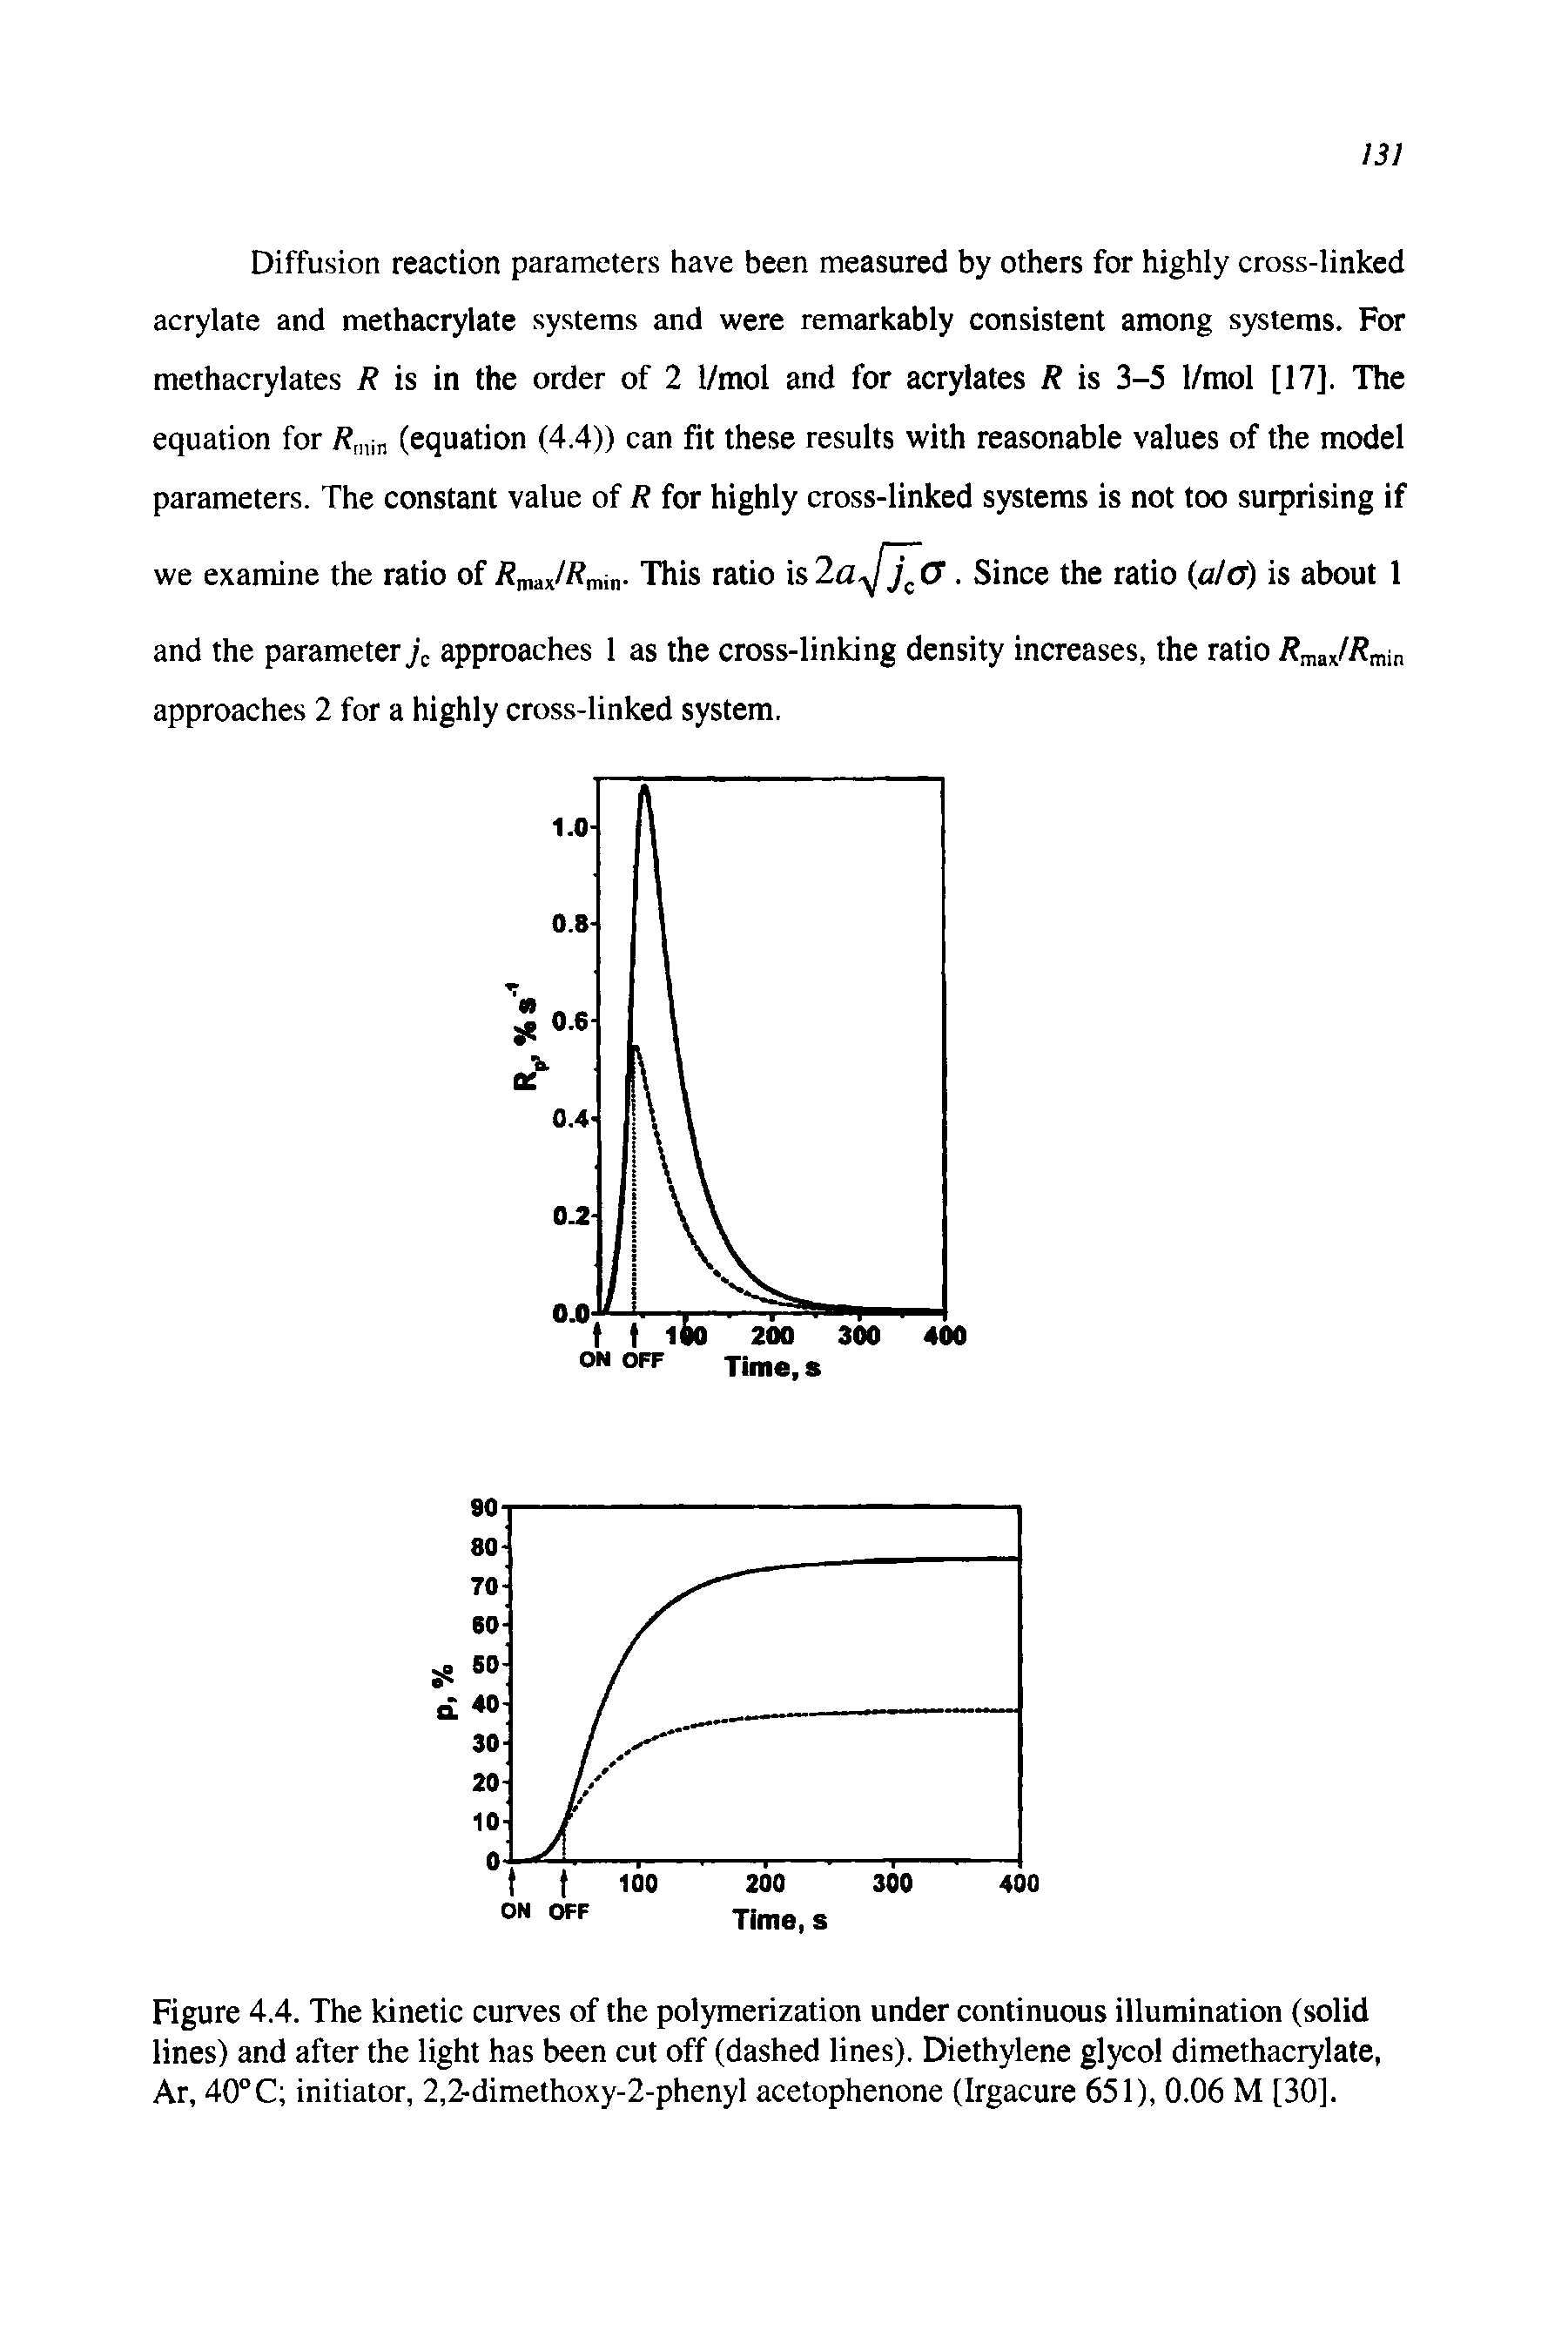 Figure 4.4. The kinetic curves of the polymerization under continuous illumination (solid lines) and after the light has been cut off (dashed lines). Diethylene glycol dimethacrylate, Ar, 40 C initiator, 2,2-dimethoxy-2-phenyl acetophenone (Irgacure 651), 0.06 M [30].